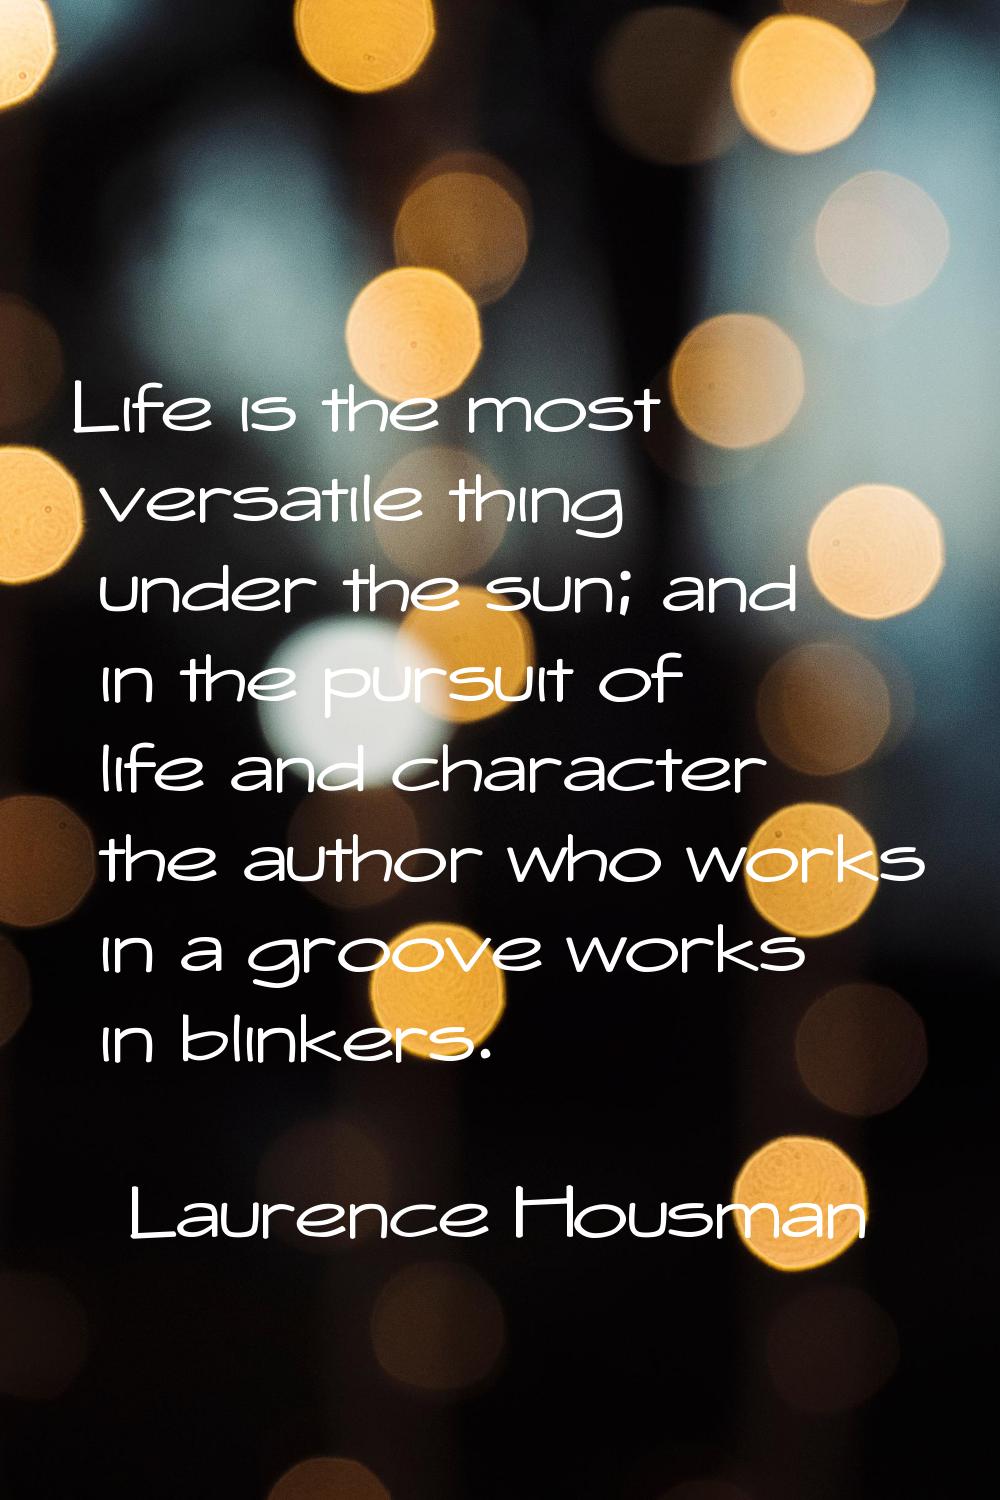 Life is the most versatile thing under the sun; and in the pursuit of life and character the author